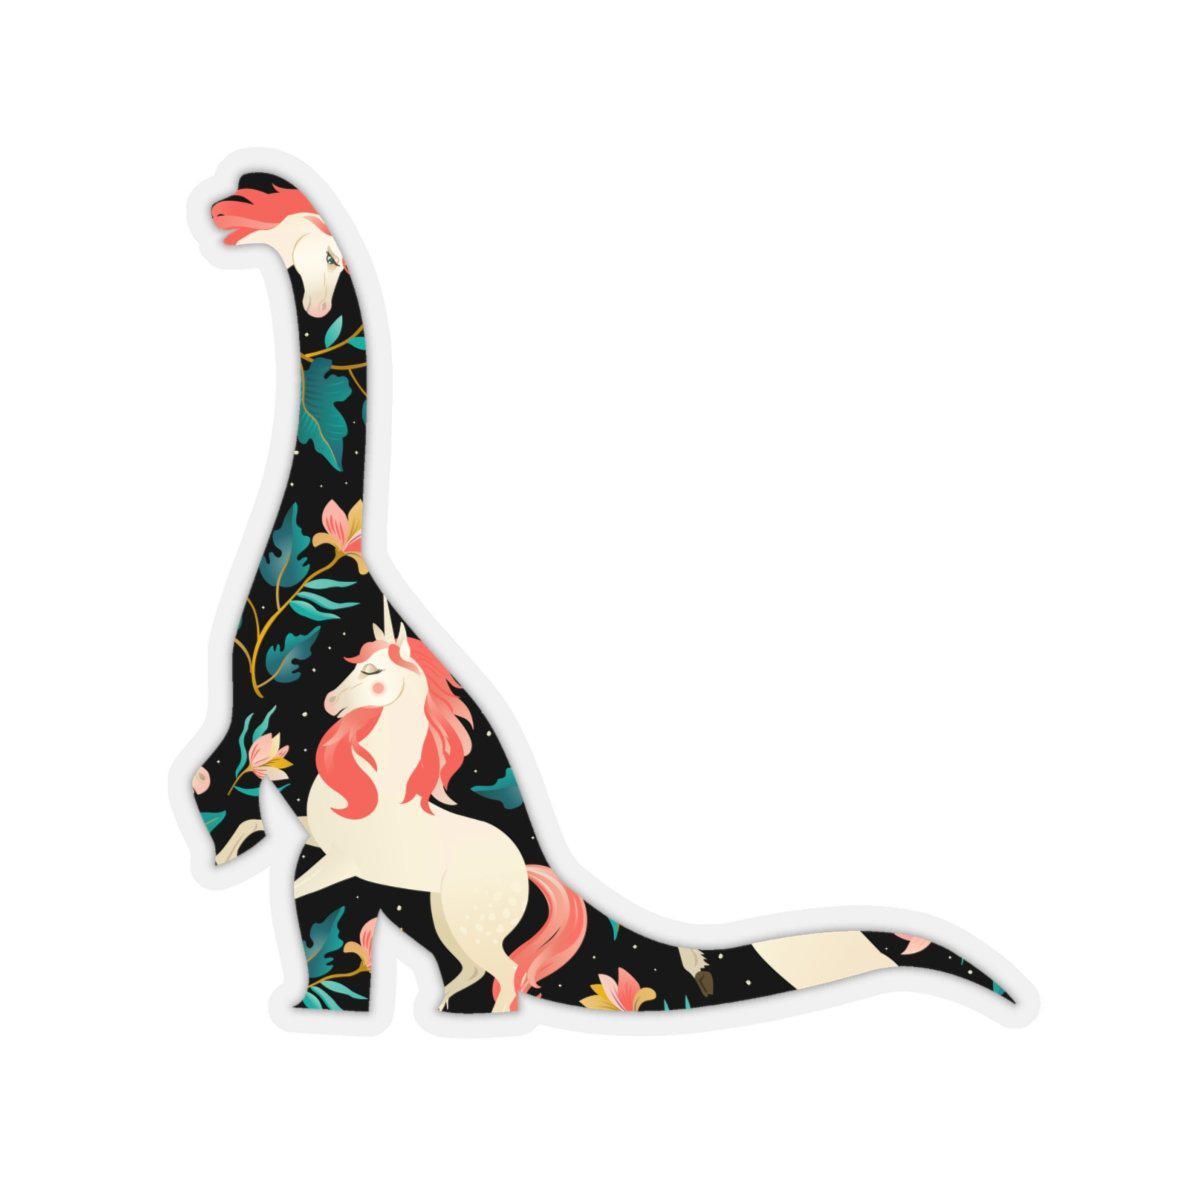 Sticker featuring a classy and regal unicorn pattern inside of a brontosaurus outline. 